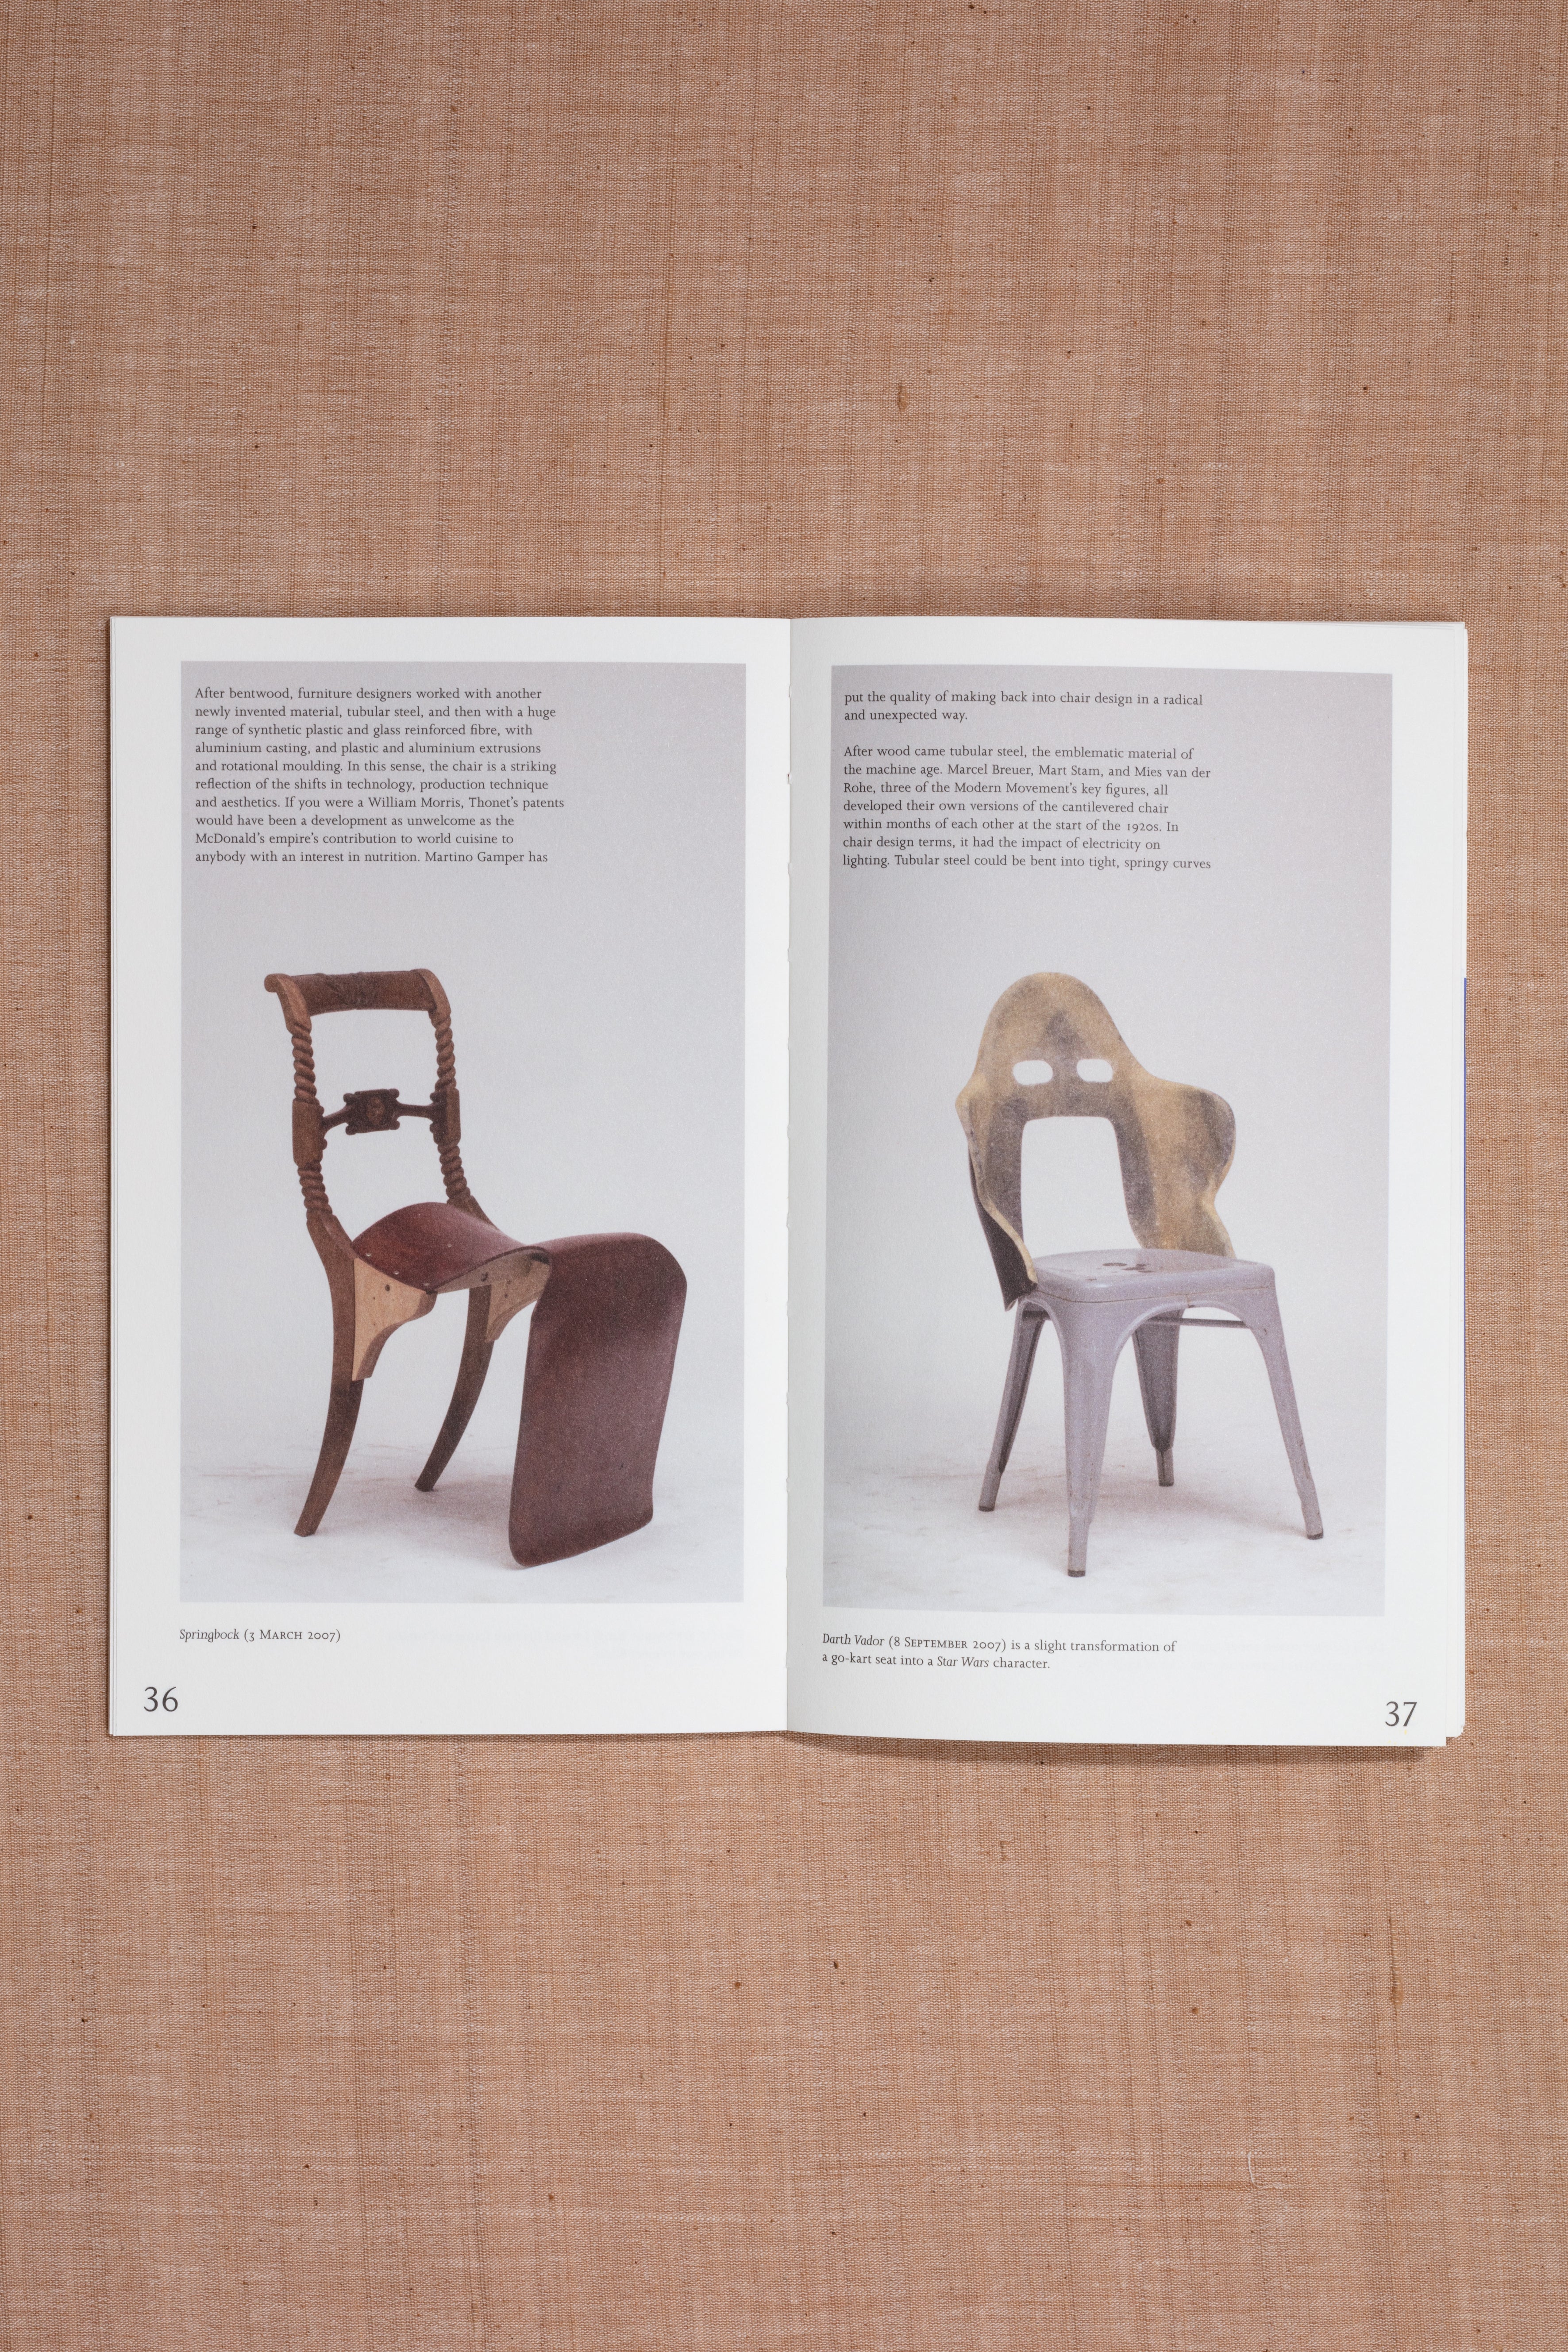 100 Chairs in 100 Days and its 100 Ways. (5th Edition, 5th Size 